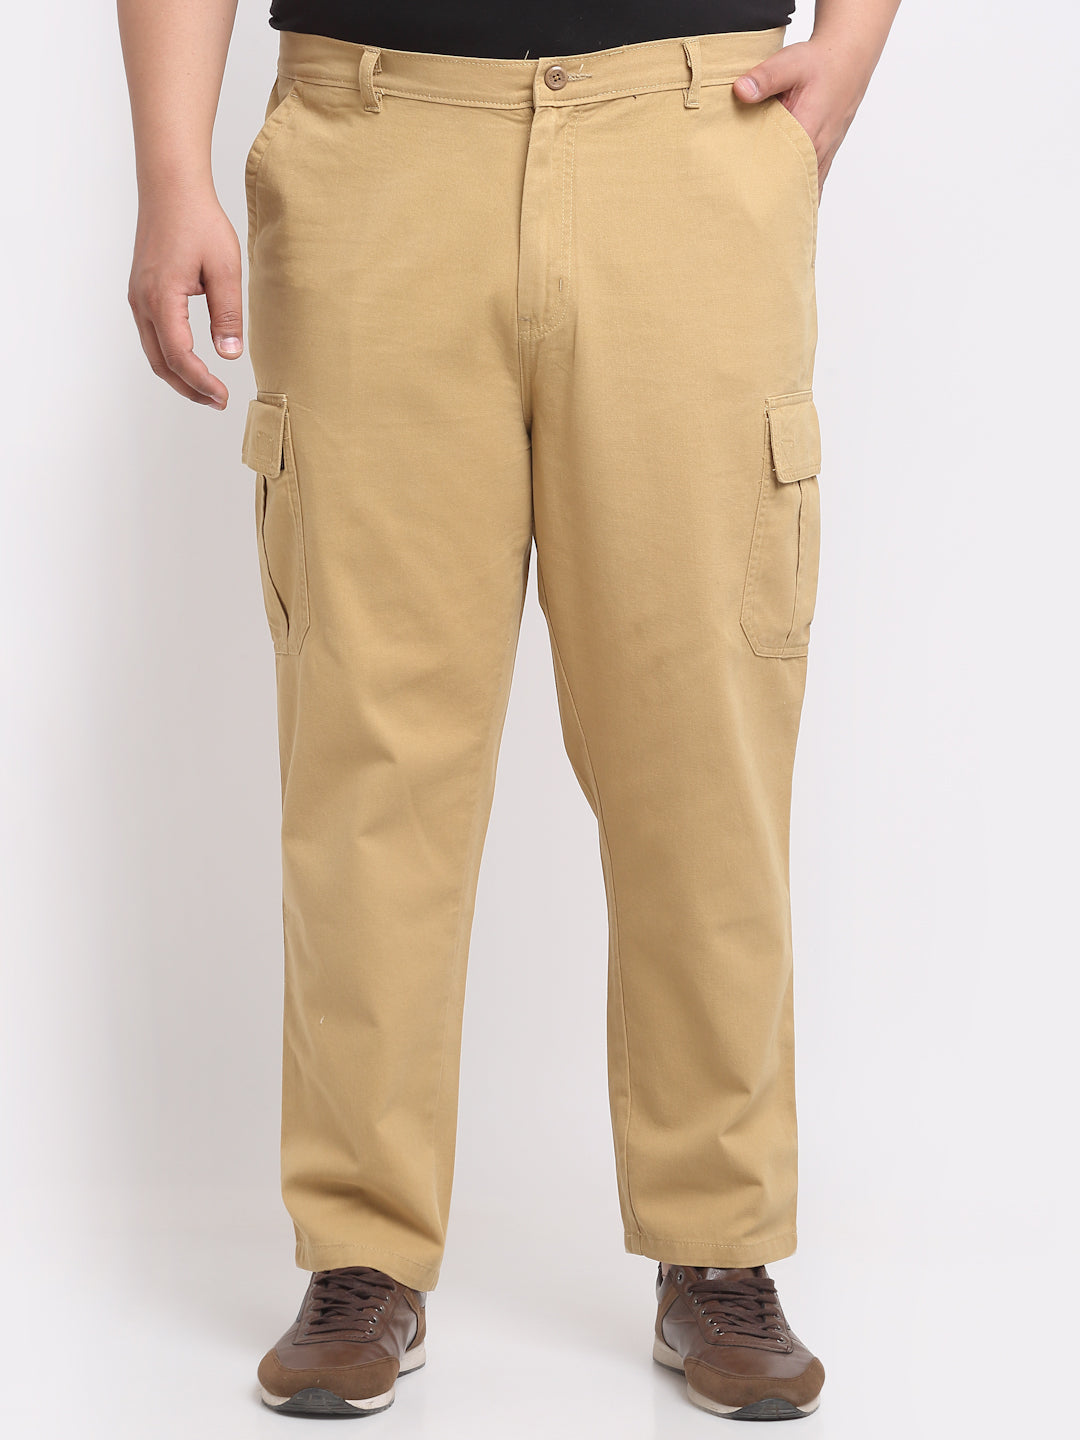 New Look Khaki Cotton Cuffed Cargo Trousers | very.co.uk